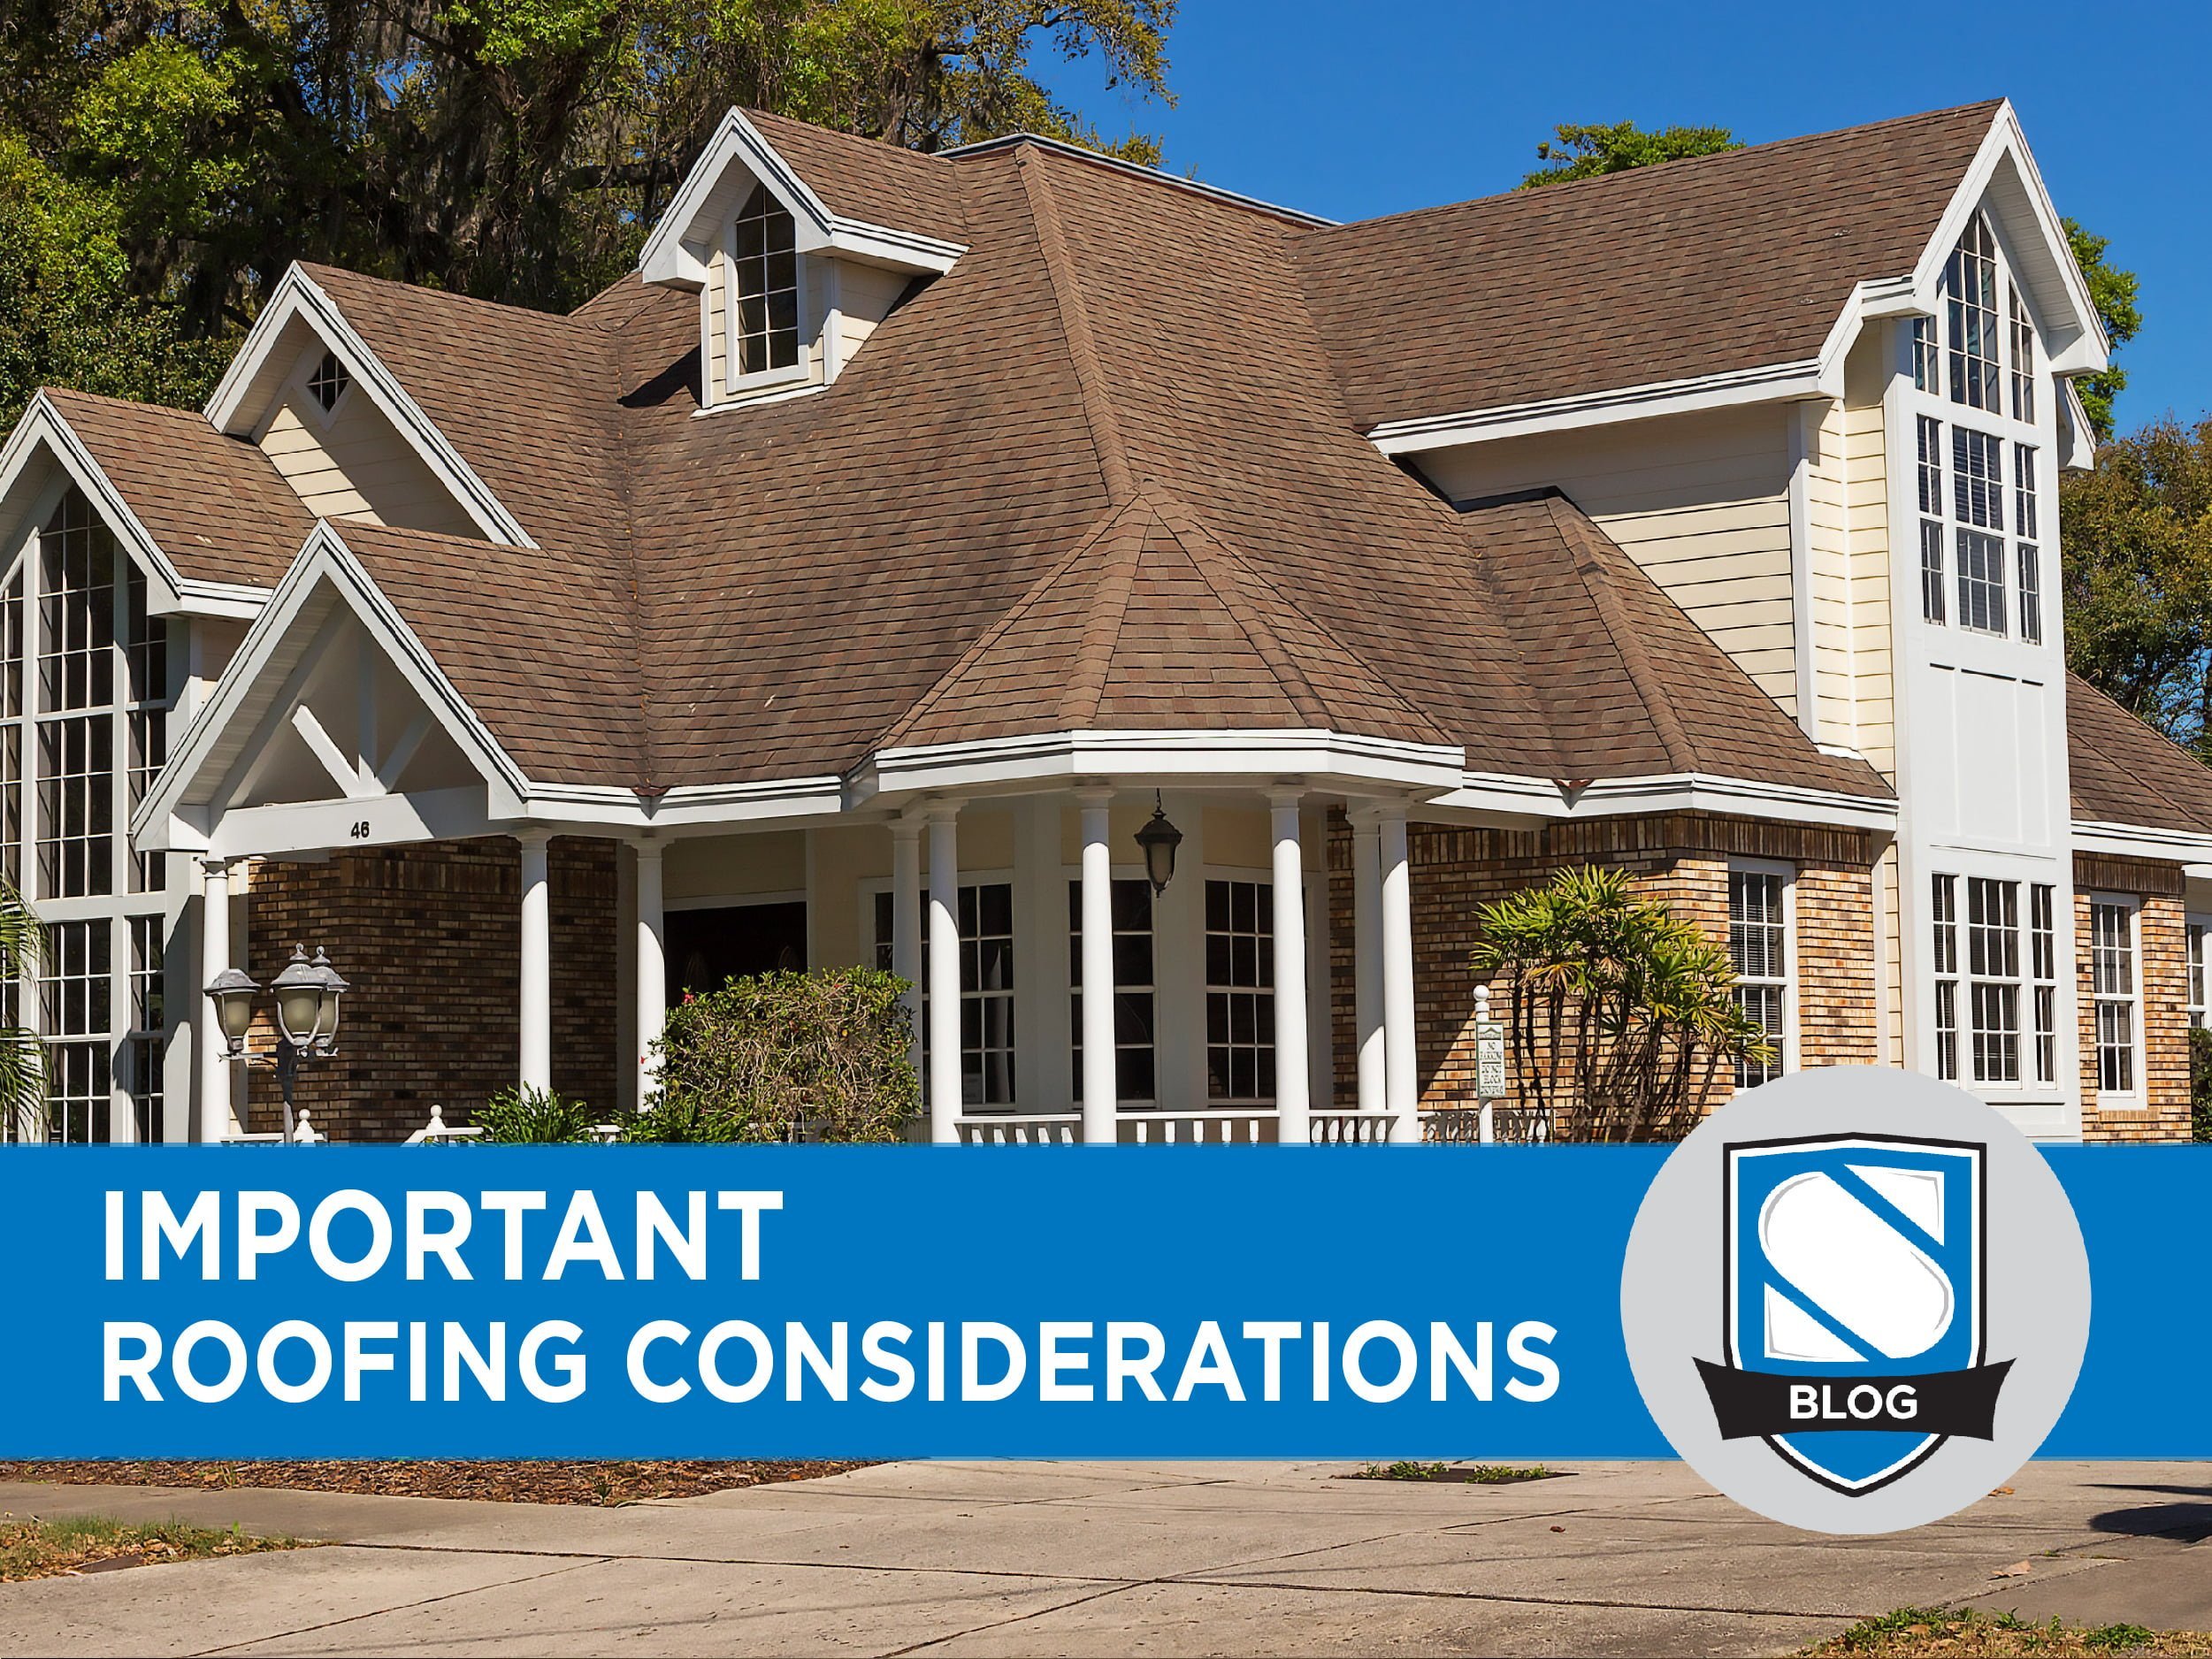 Roofing Considerations to Keep Your Property Safe